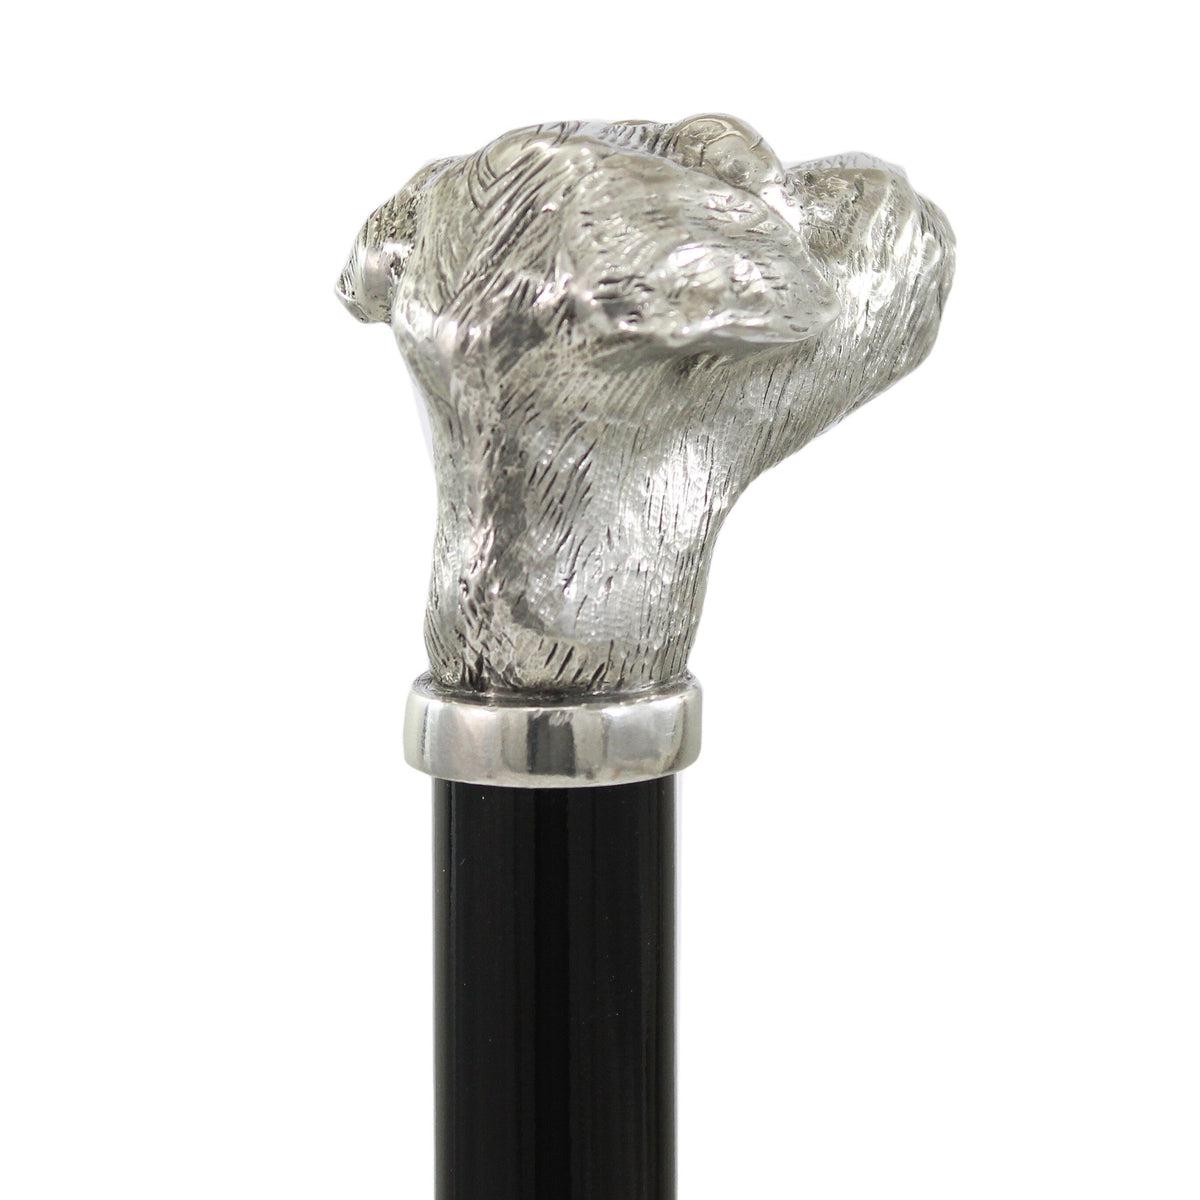 Solid Pewter Head and Beechwood Shaft Schnauzer Walking Stick or Cane